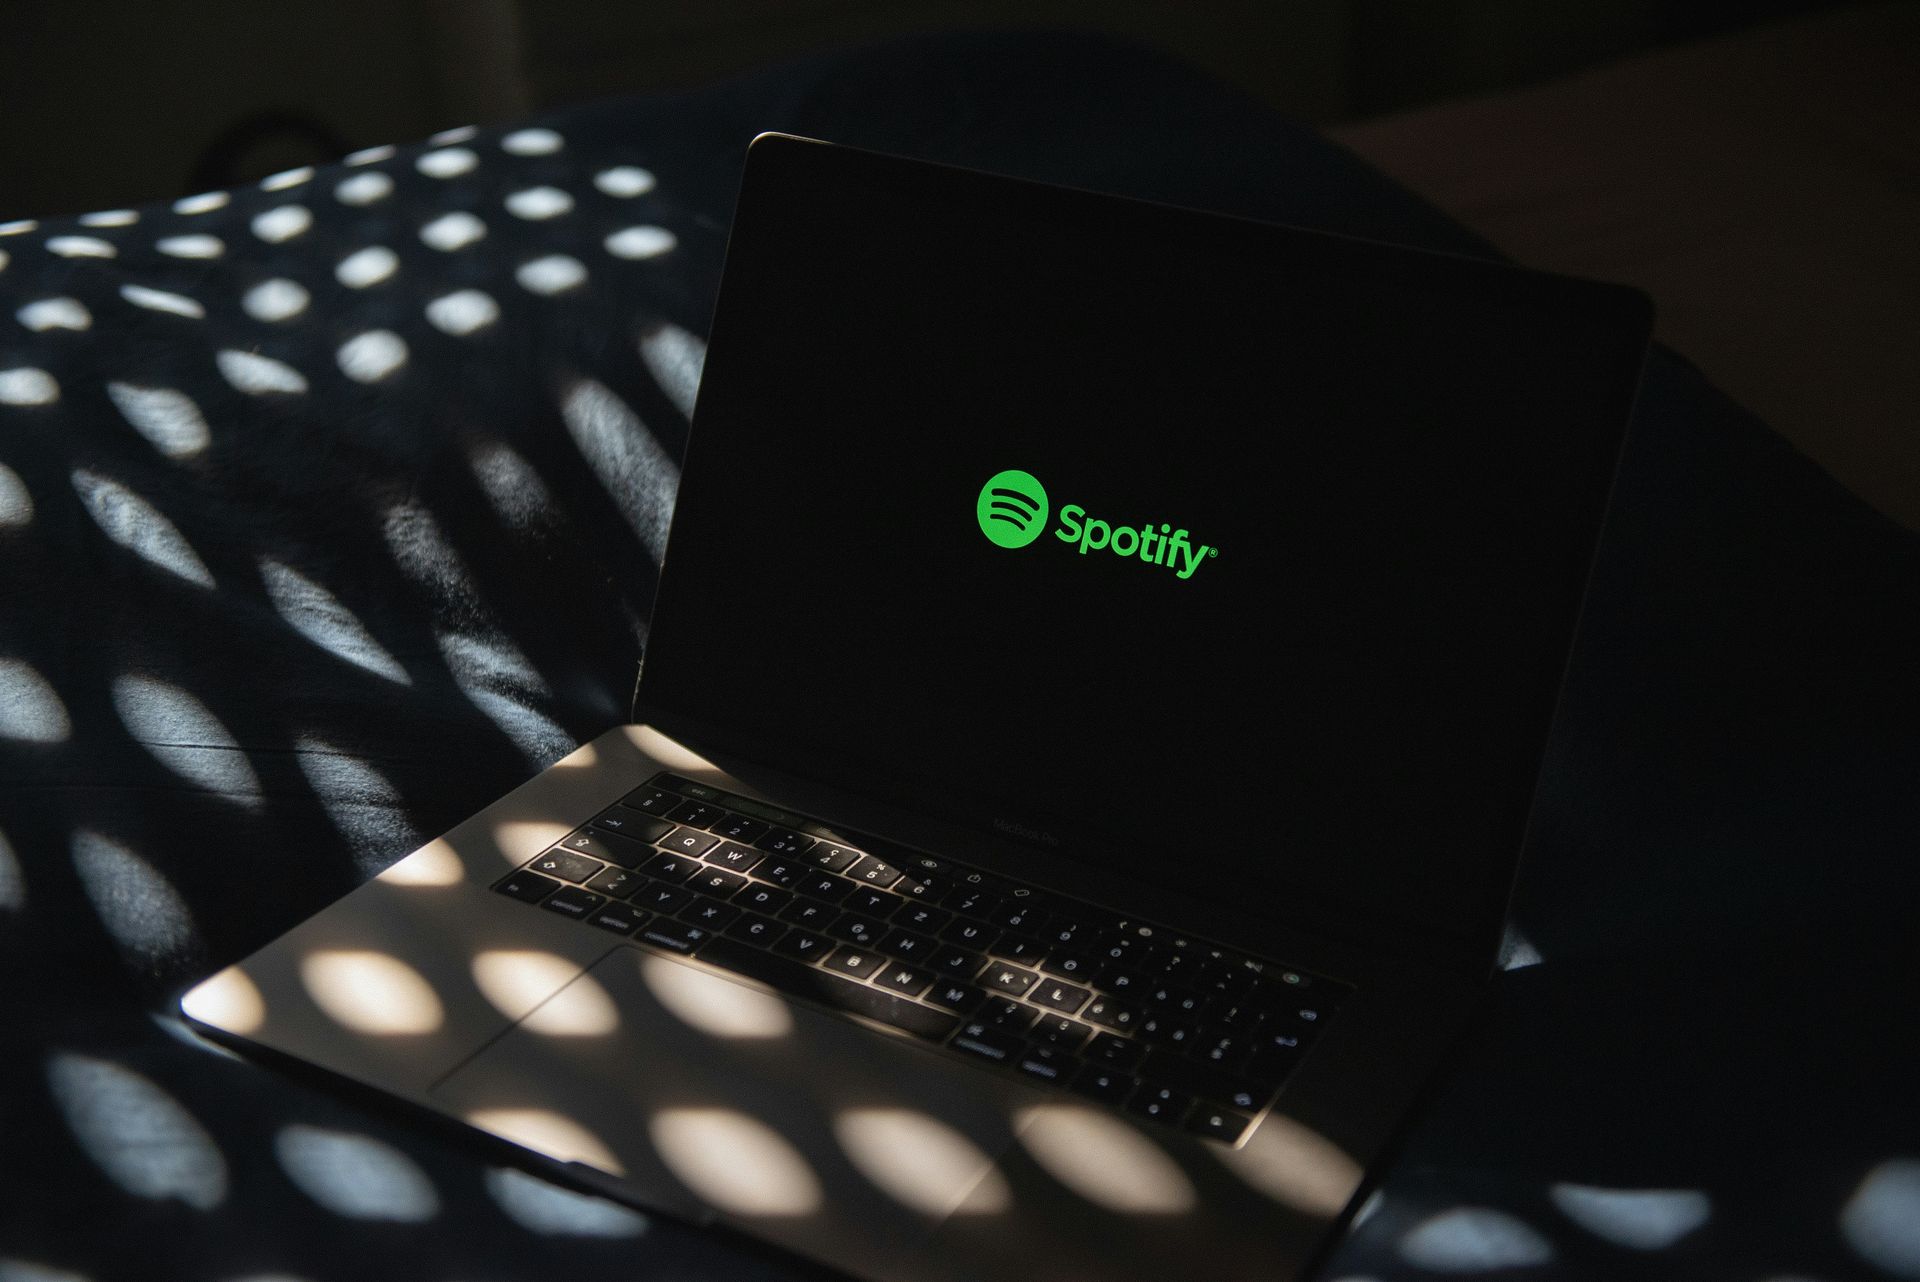 Spotify users in Europe to get new in-app purchase options